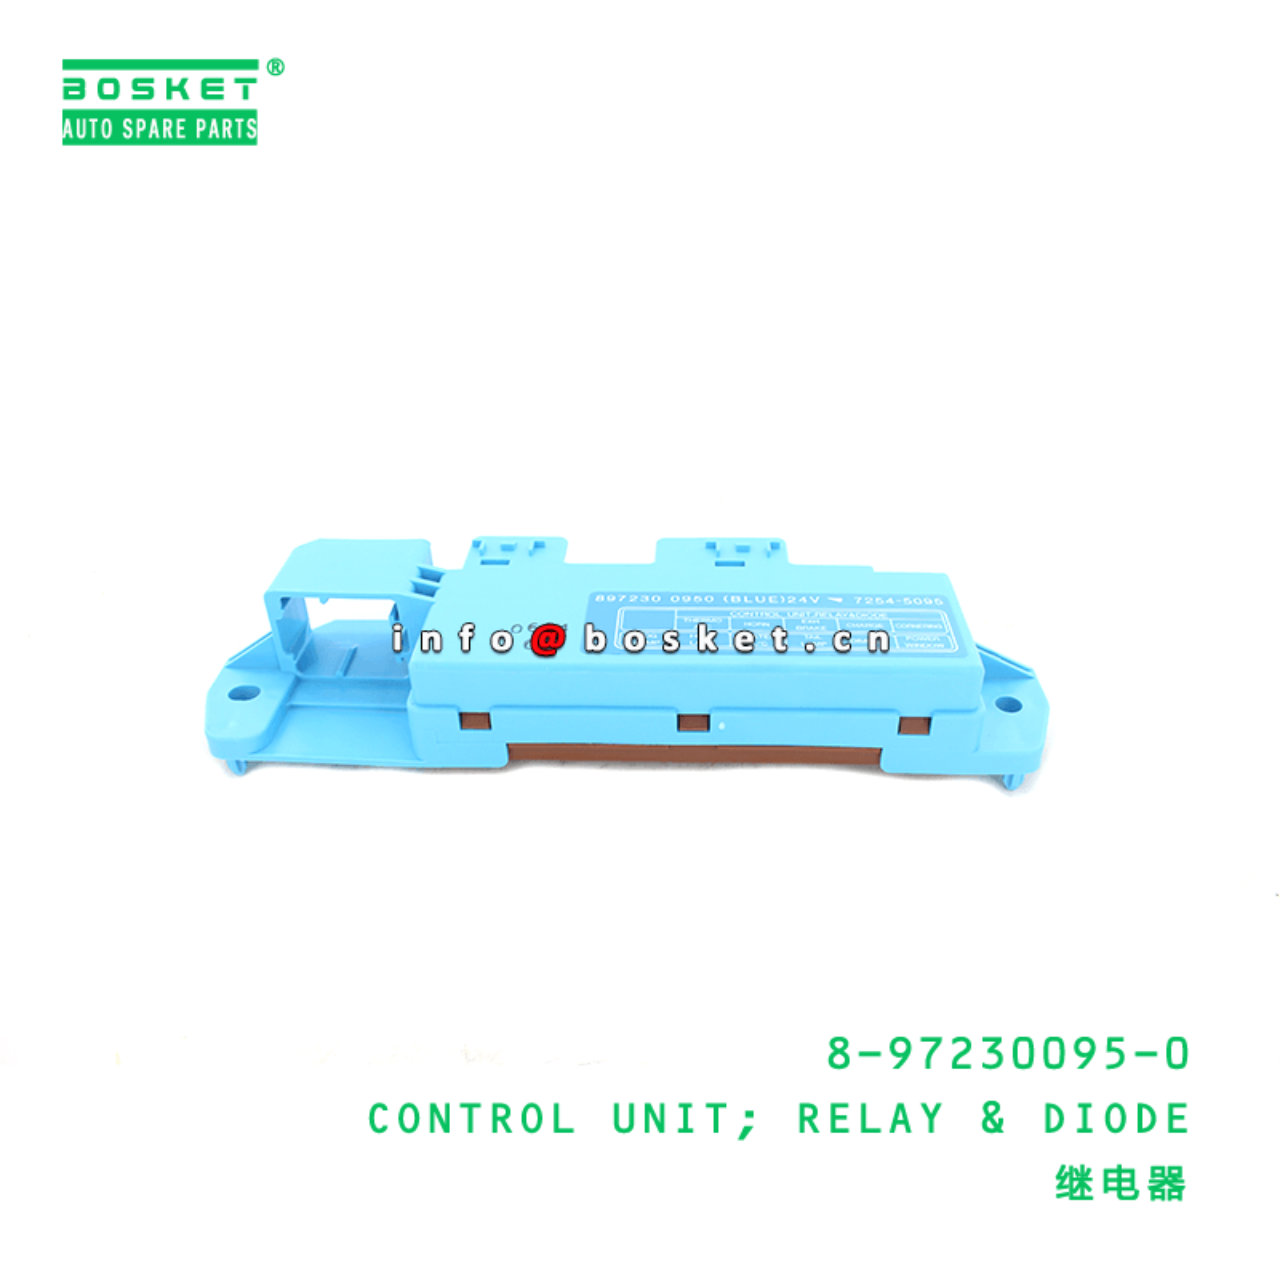  8-97230095-0 Relay & Diode Control Unit 8972300950 Suitable for ISUZU NKR